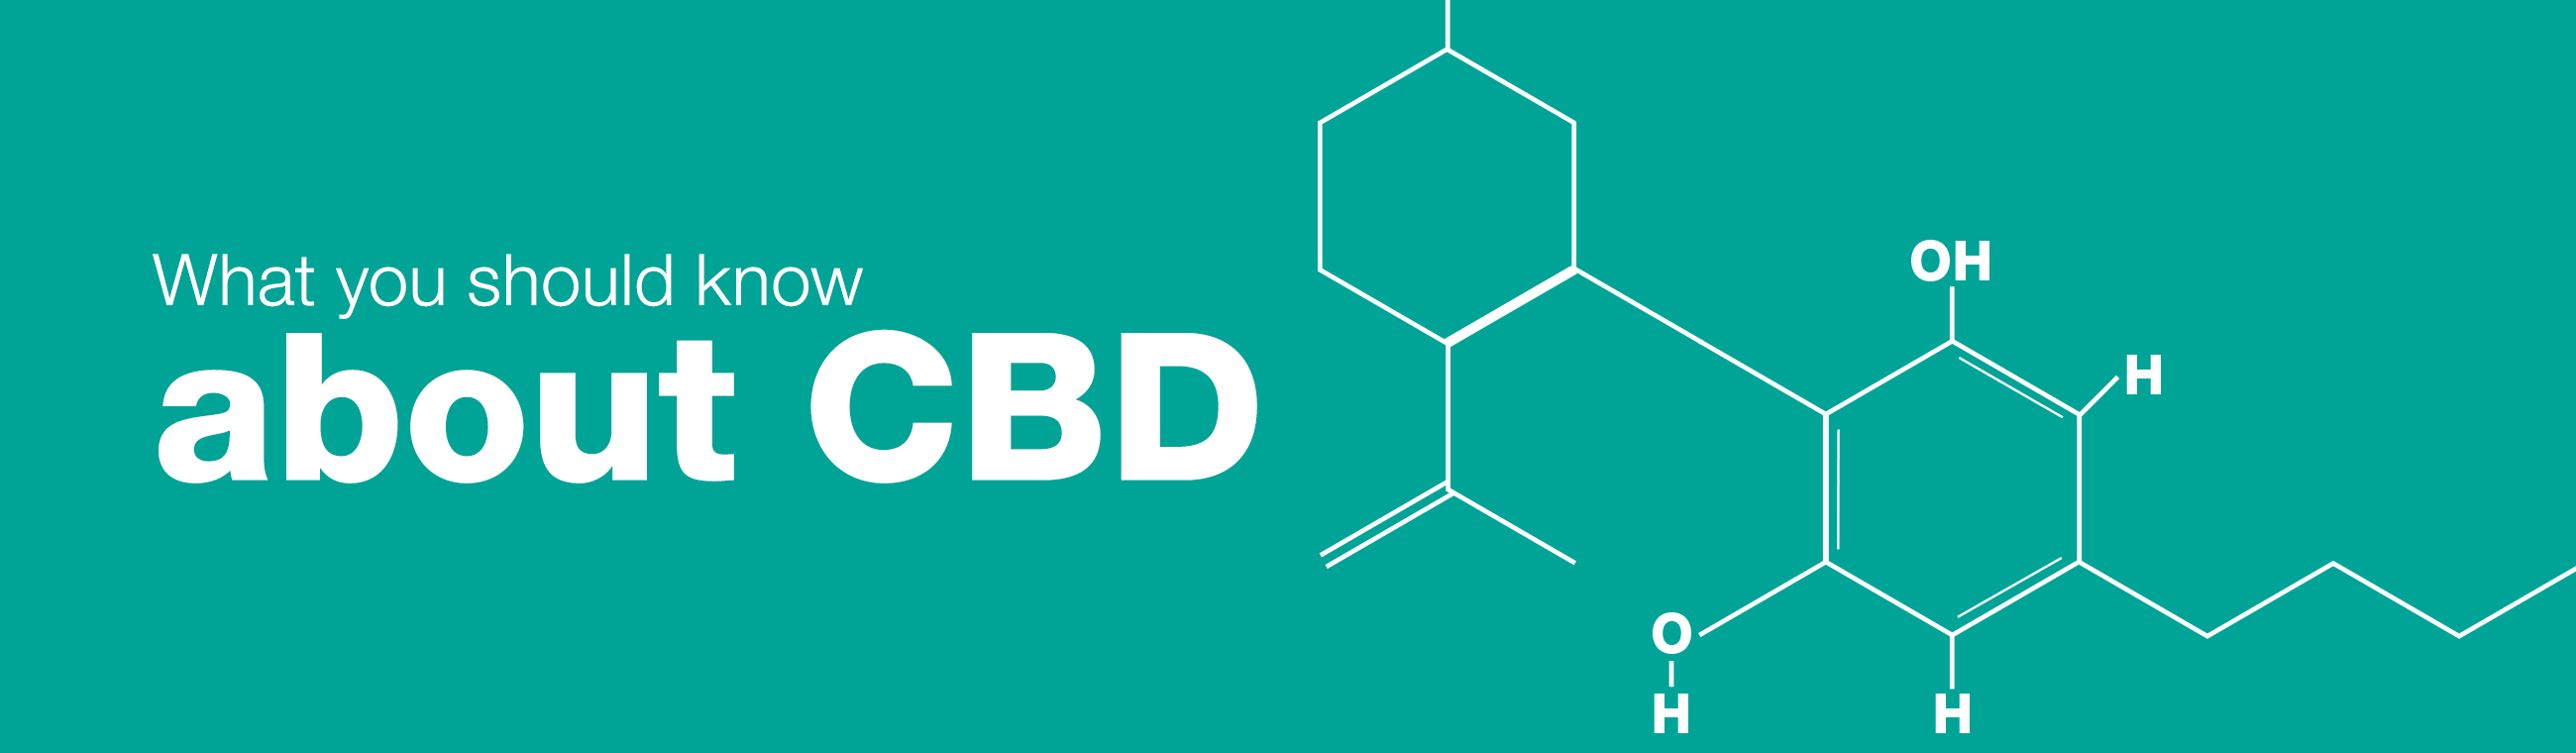 What you should know about CBD.